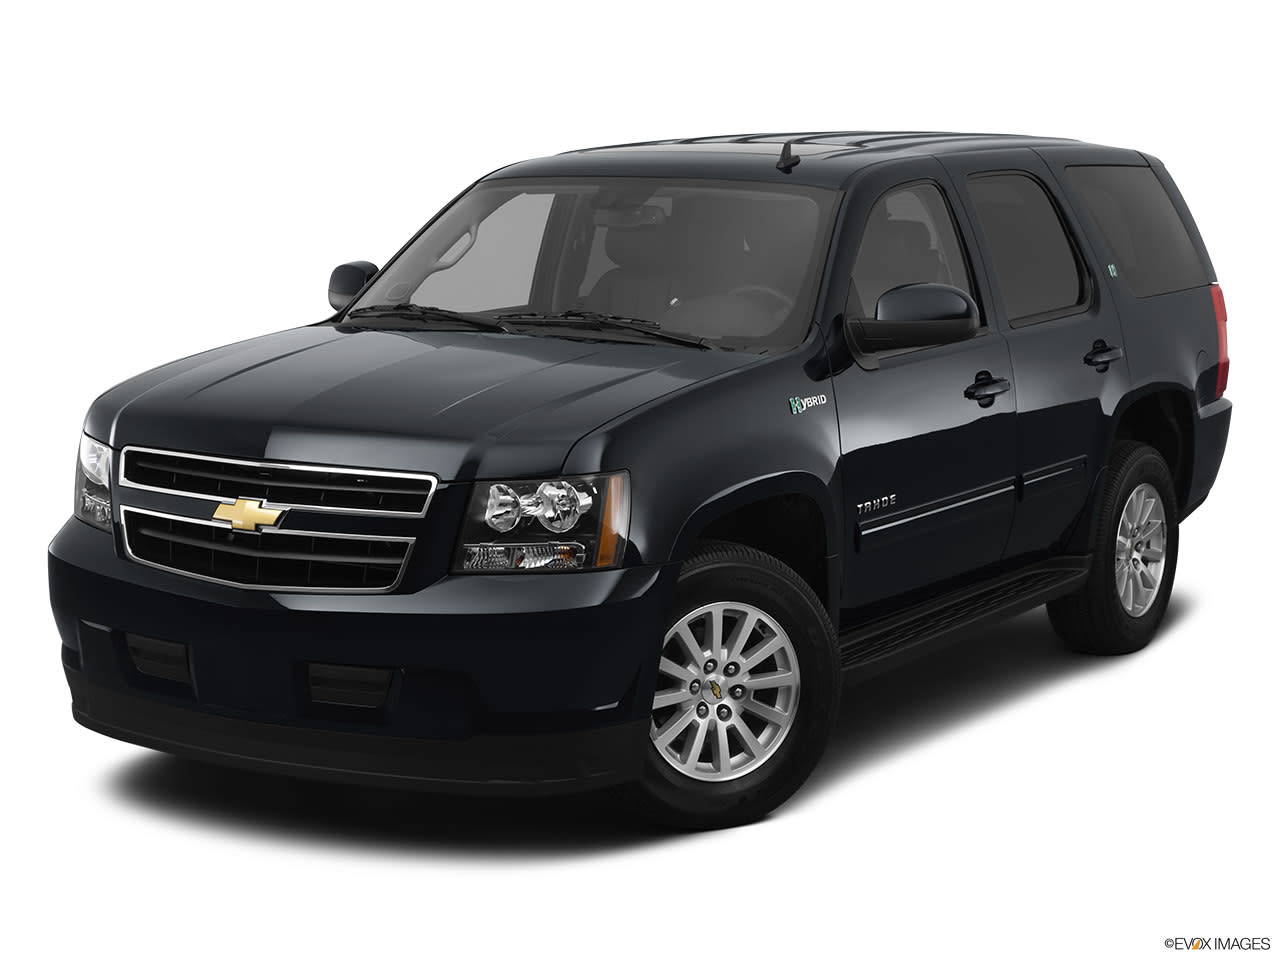 A Buyer's Guide to the 2012 Chevrolet Tahoe Hybrid | YourMechanic Advice